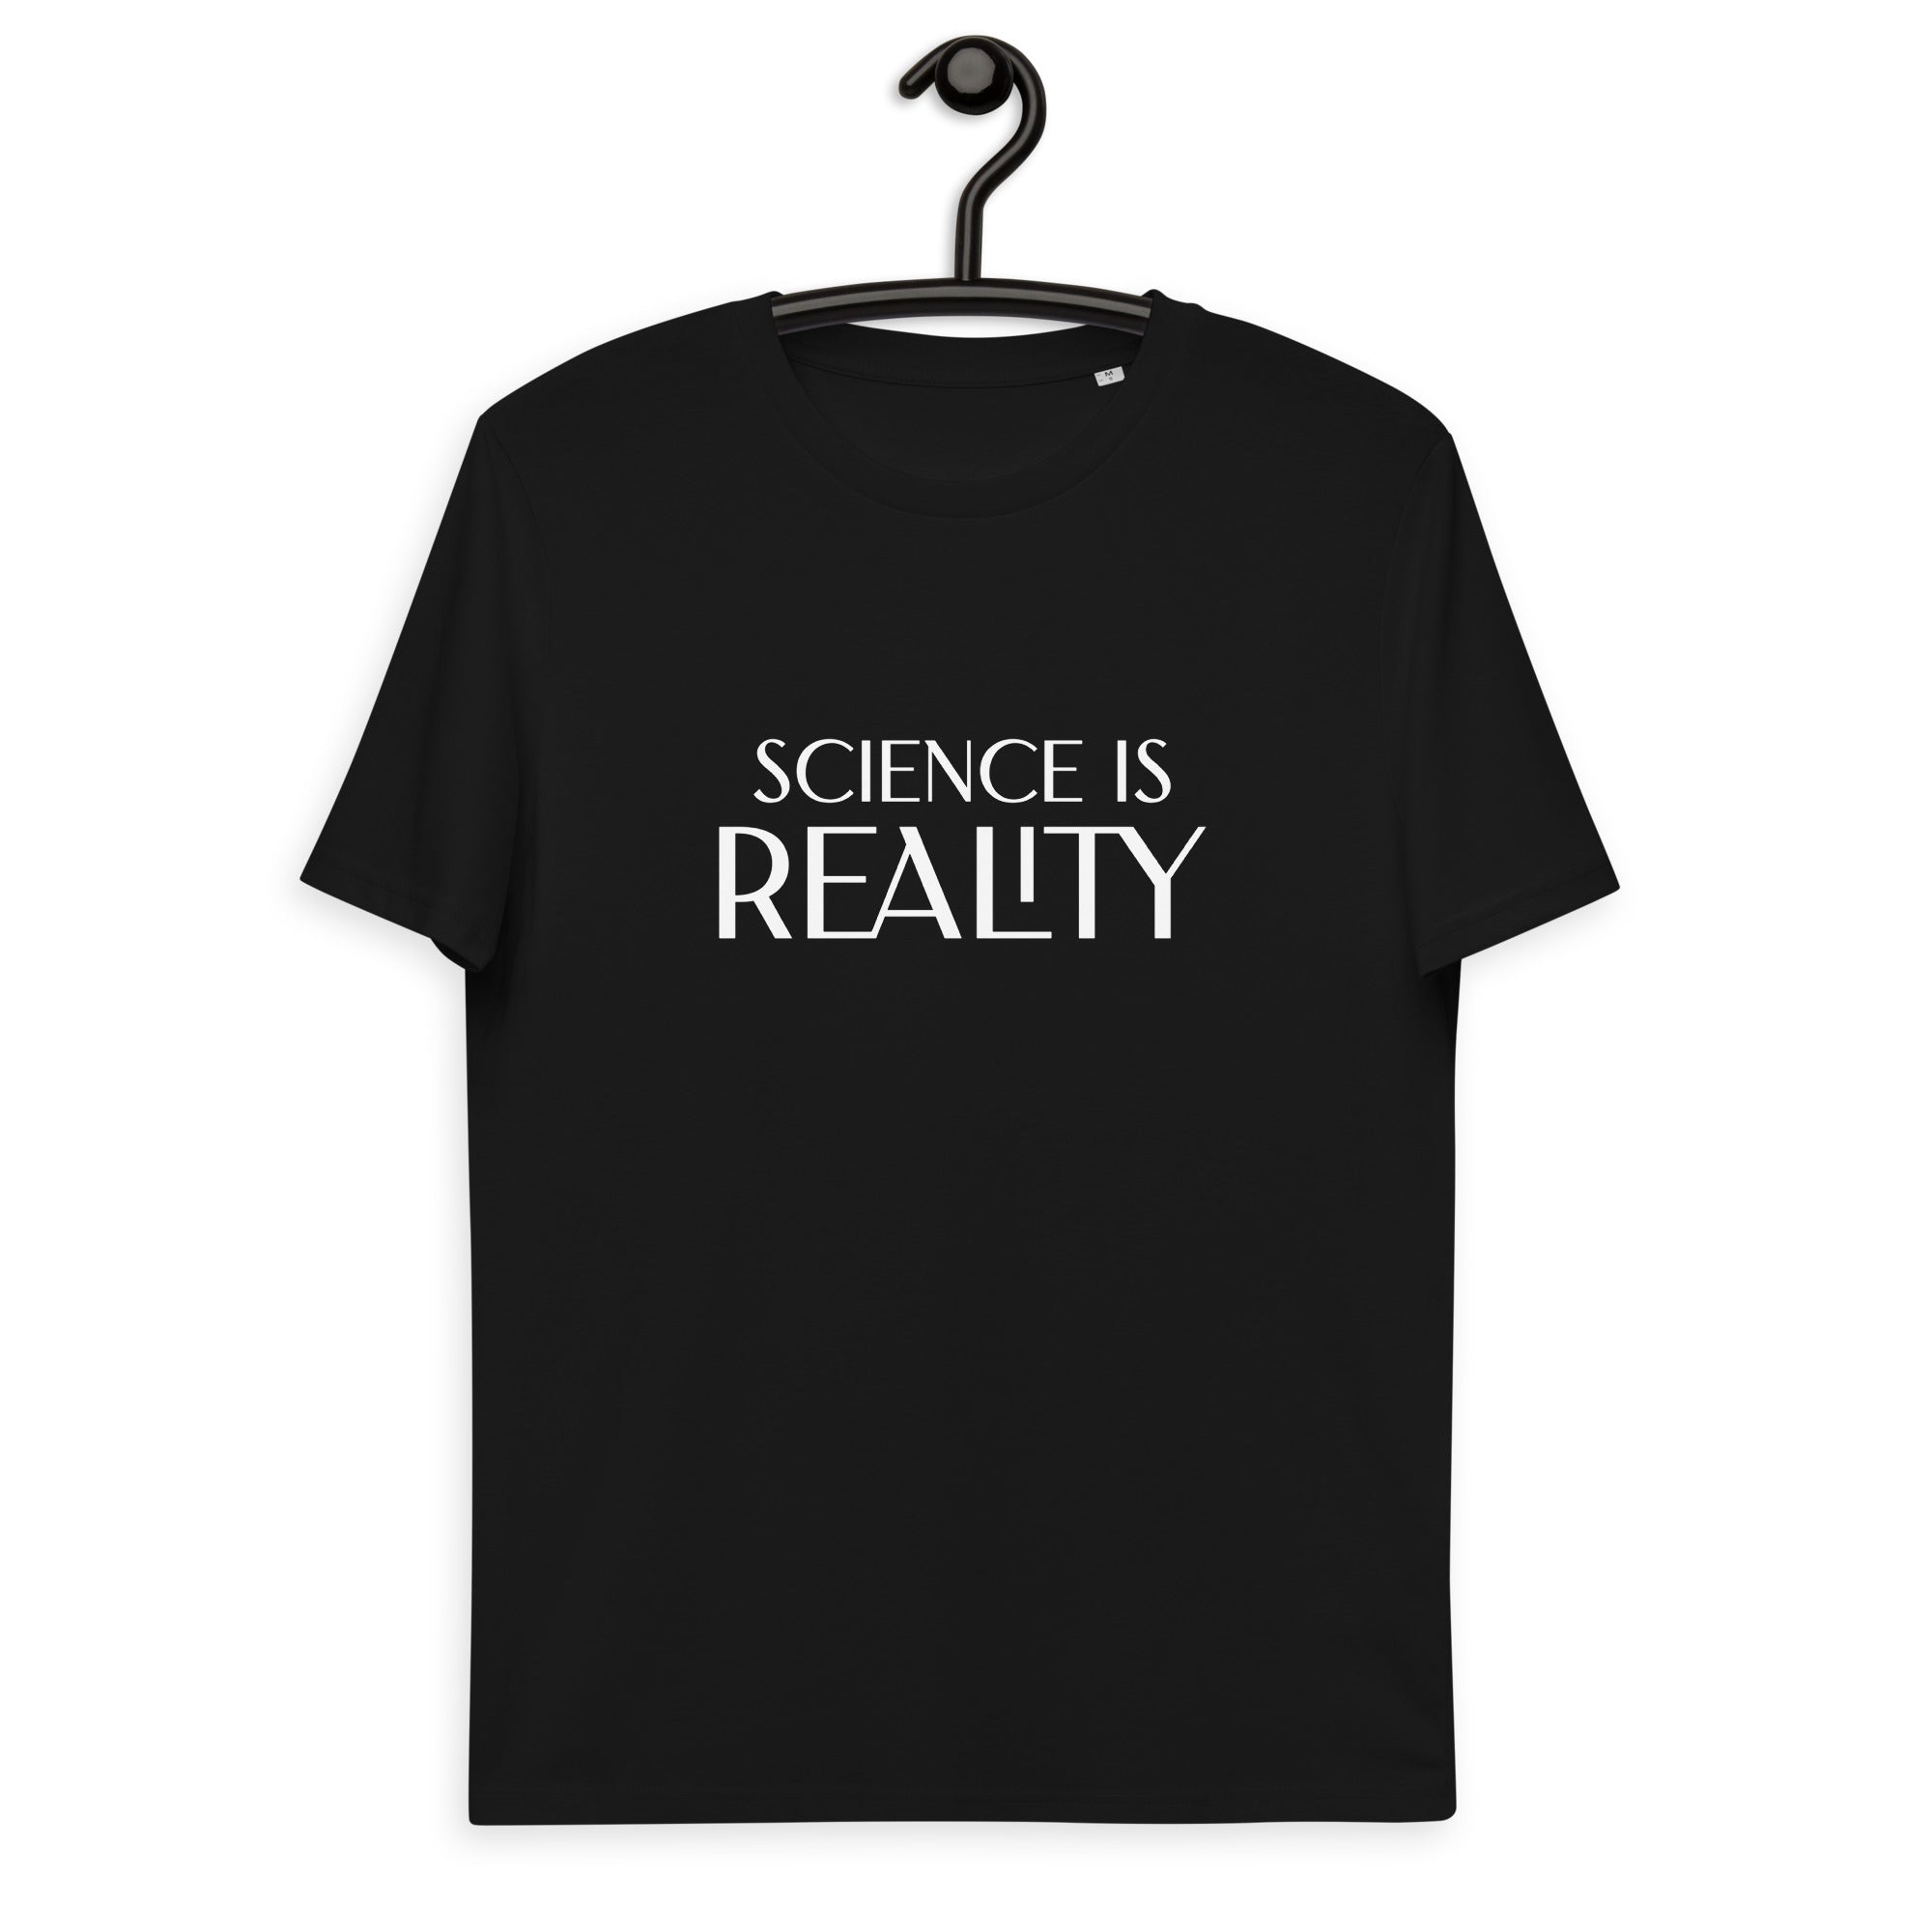 science is reality cotton t-shirt.